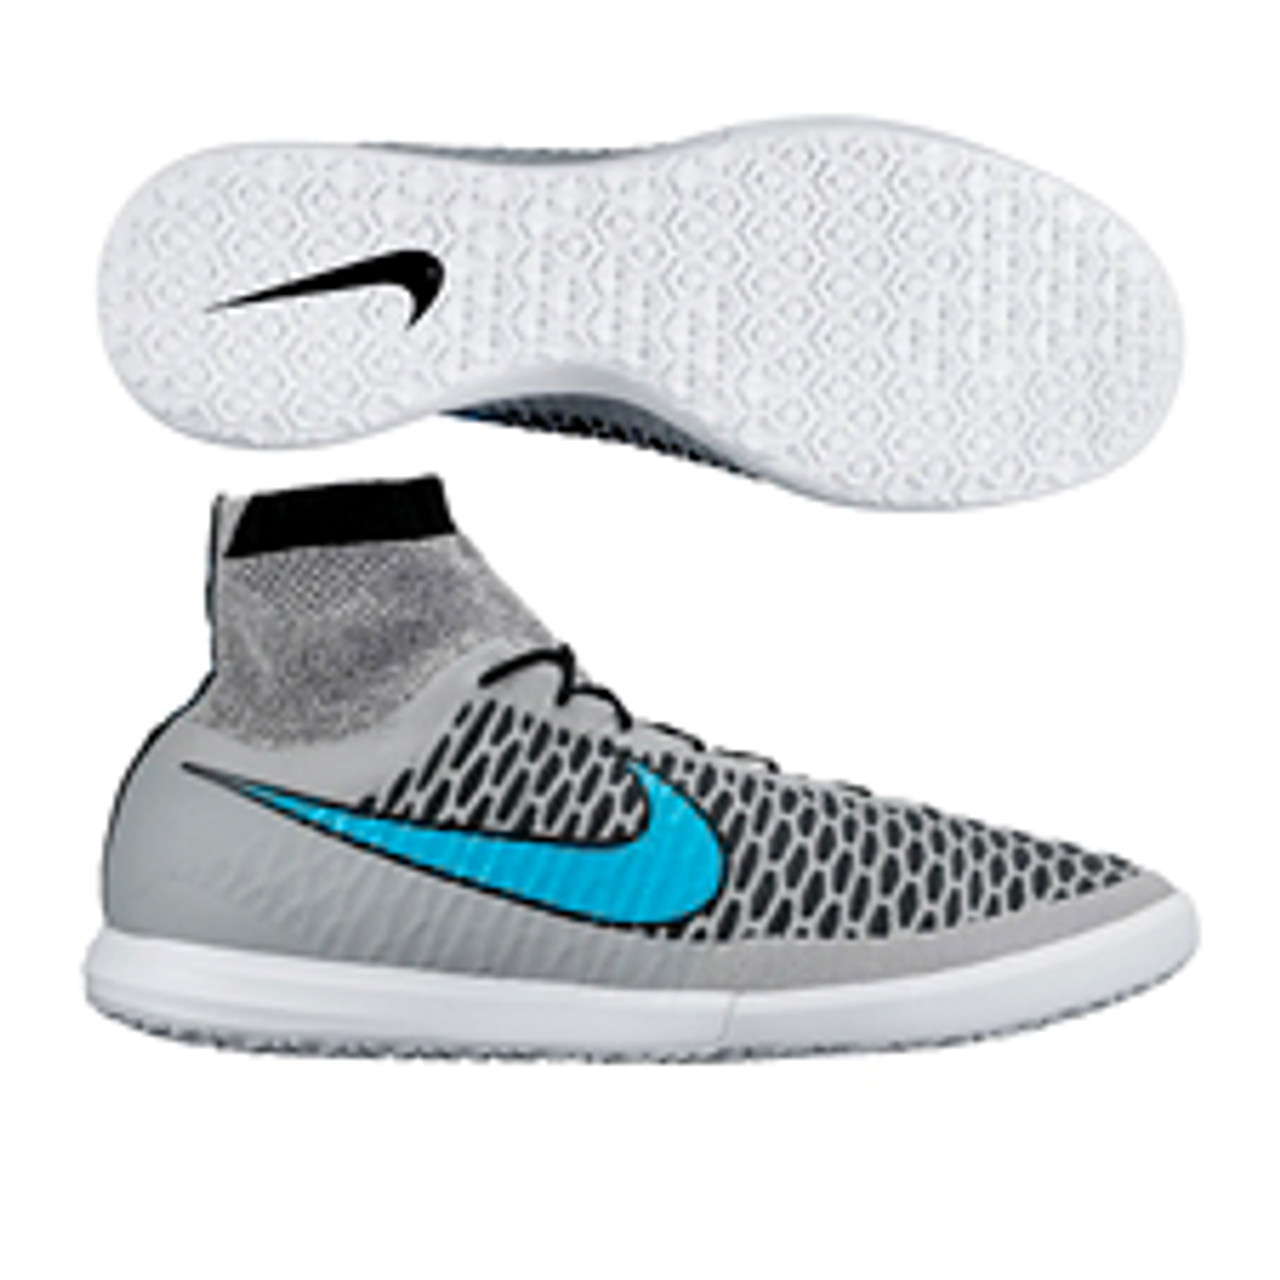 NIKE MAGISTAX PROXIMO WOLF GREY/TURQUOZE soccer shoes - Soccer Plus